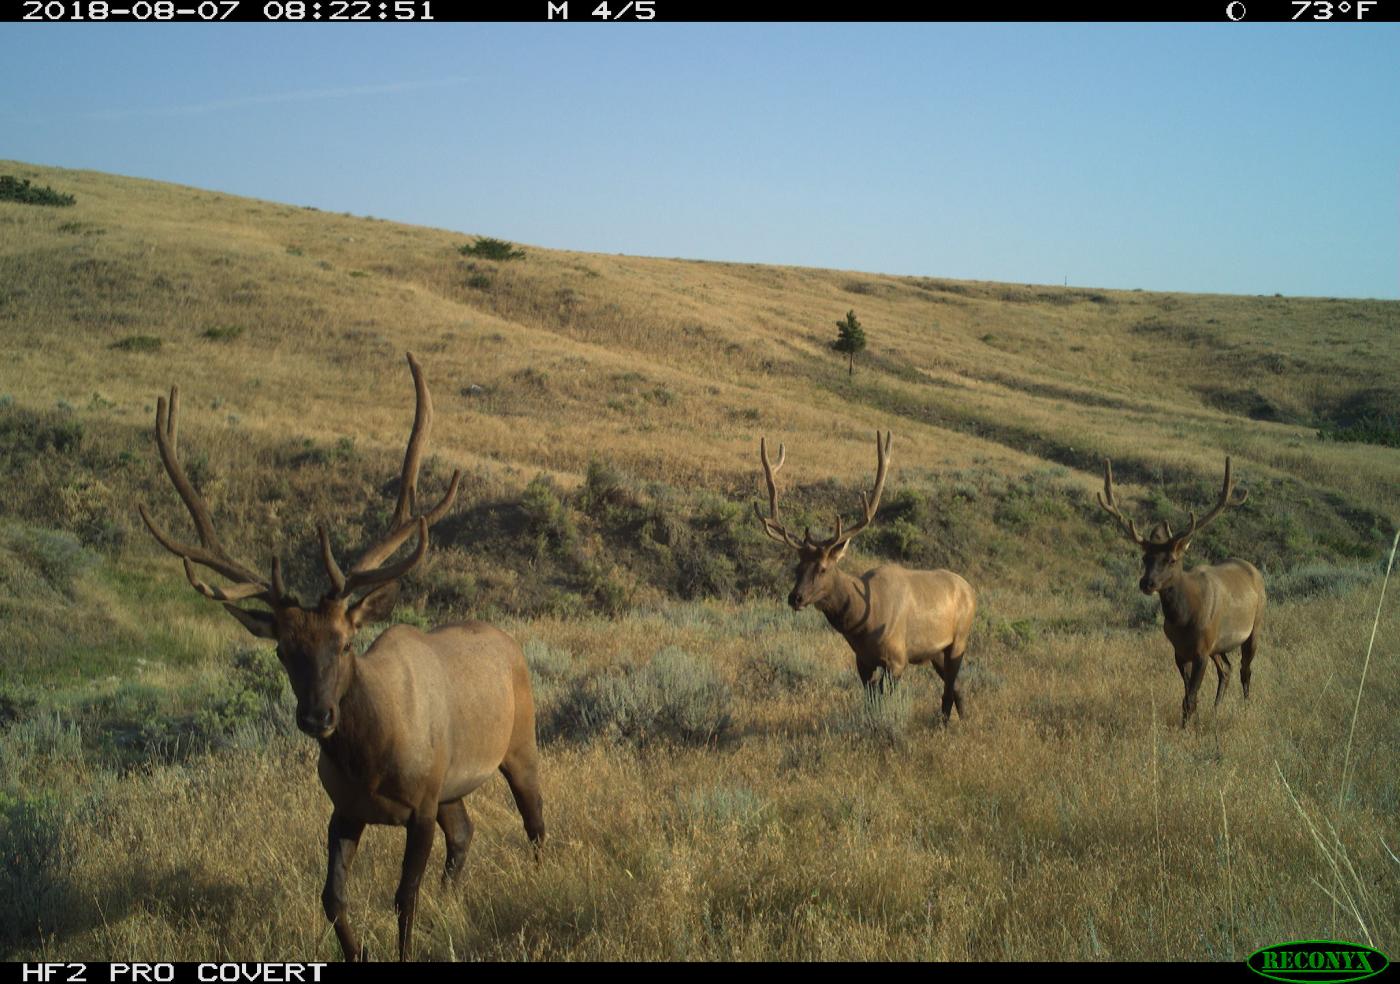 A group of three elk (Cervus canadensis) with long horns walk through the grass. They were caught on film by a camera trap in the American Prairie Reserve in Montana